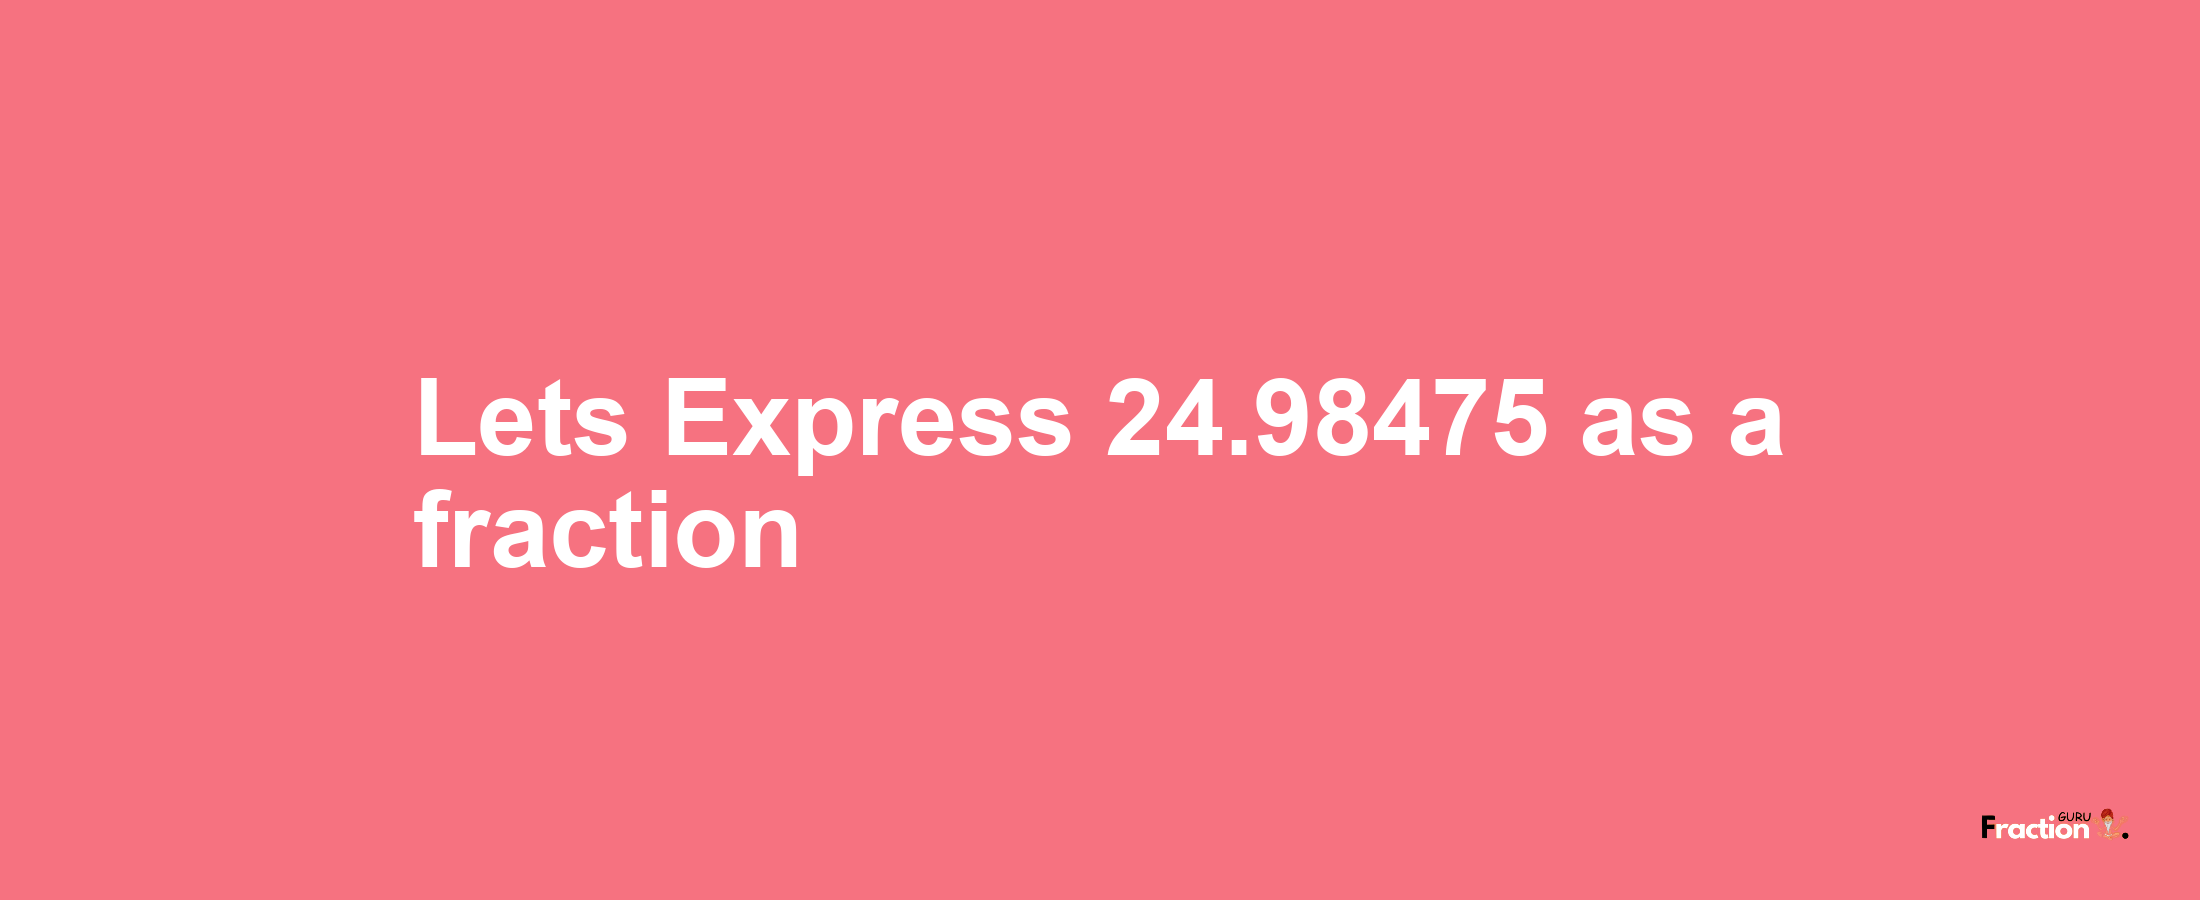 Lets Express 24.98475 as afraction